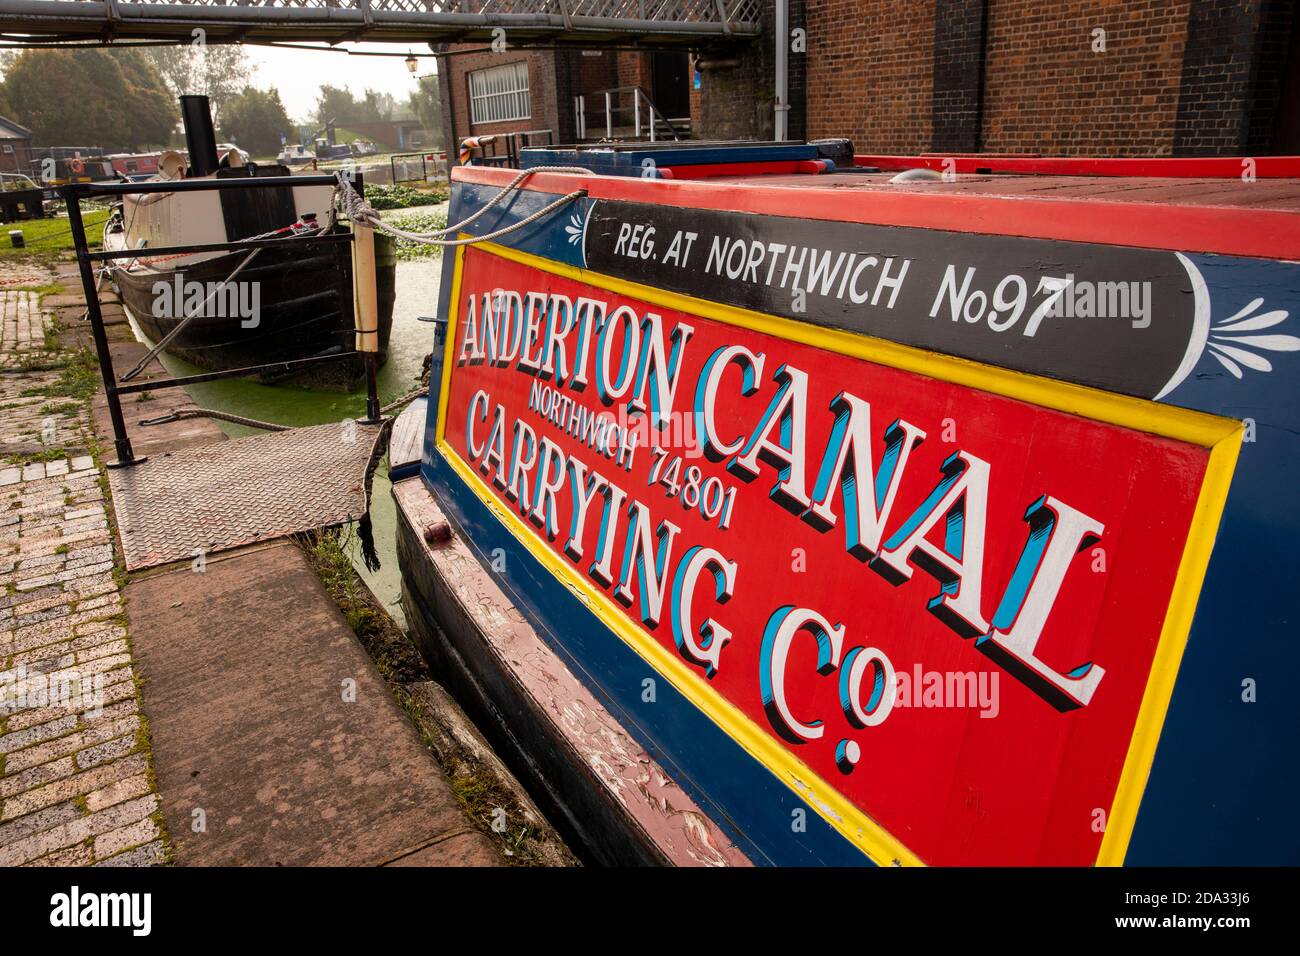 UK, England, Cheshire, Ellesmere Port, National Waterways Museum, Anderton Canal Carrying Co, narrowboat at pump house basin Stock Photo